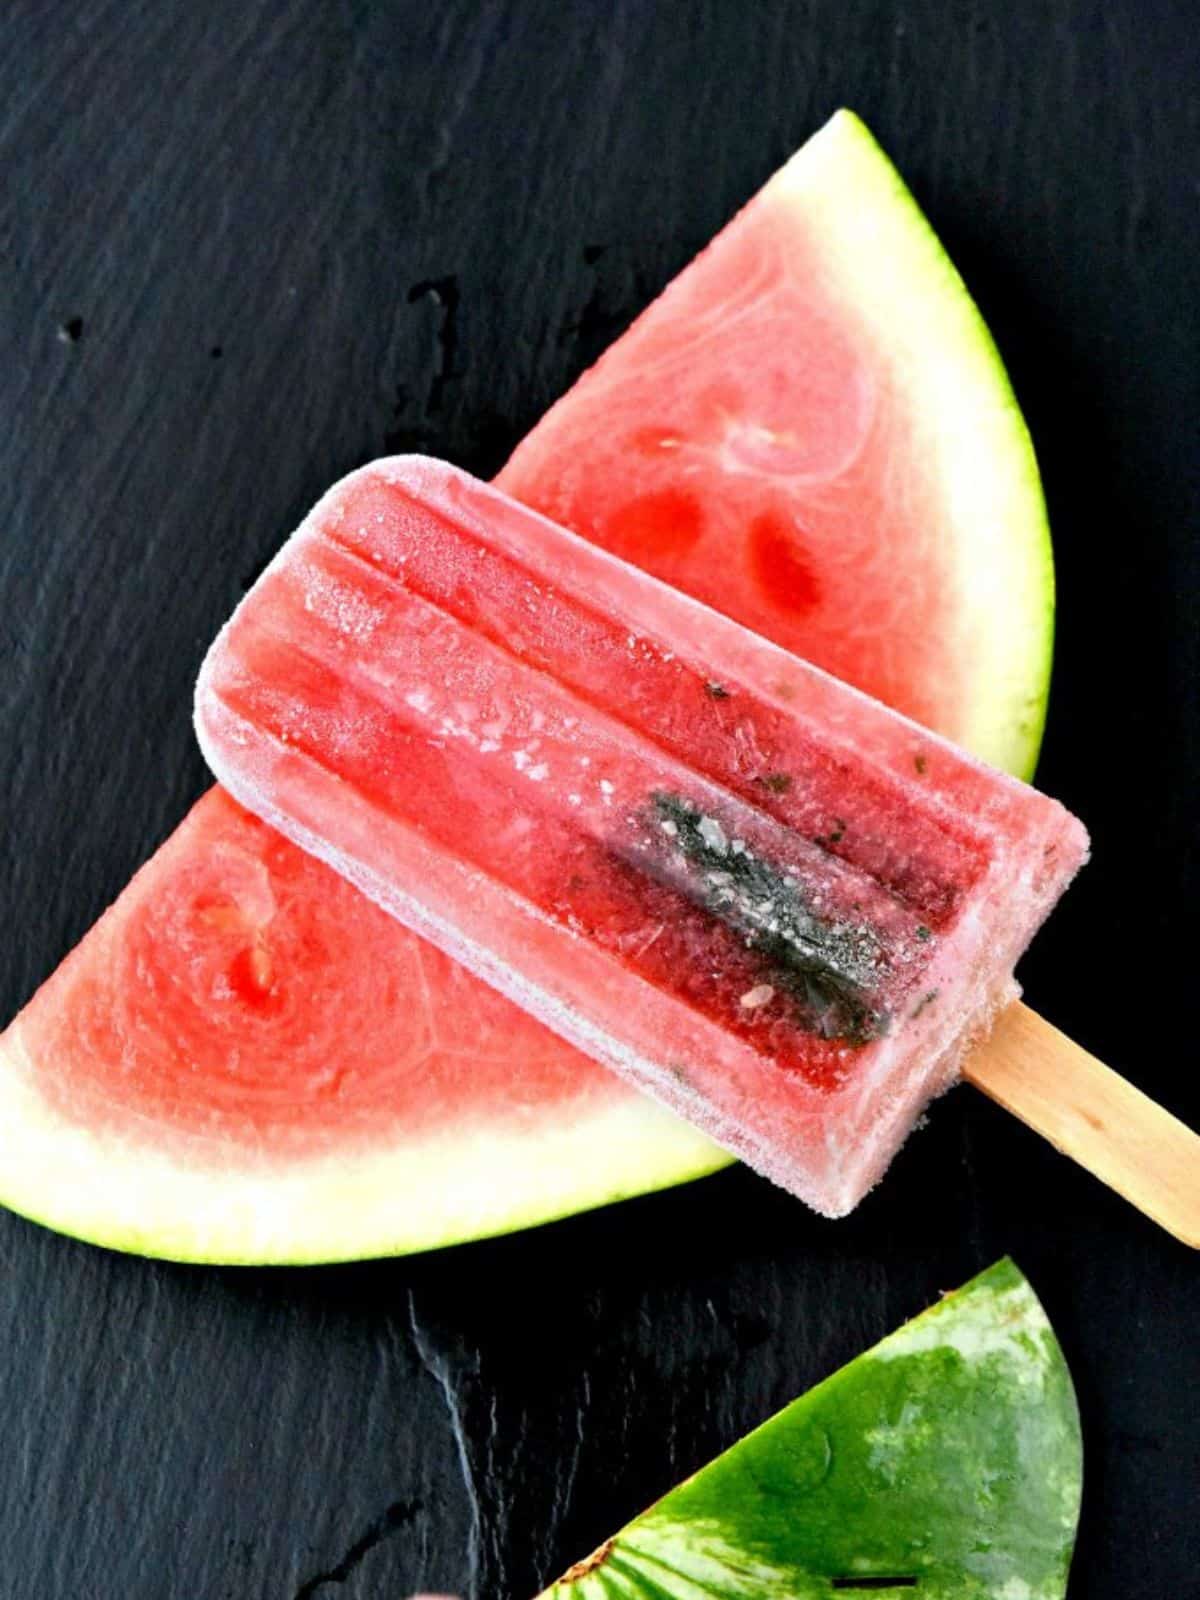 watermelon mojito popsicle for a refreshing poptail.